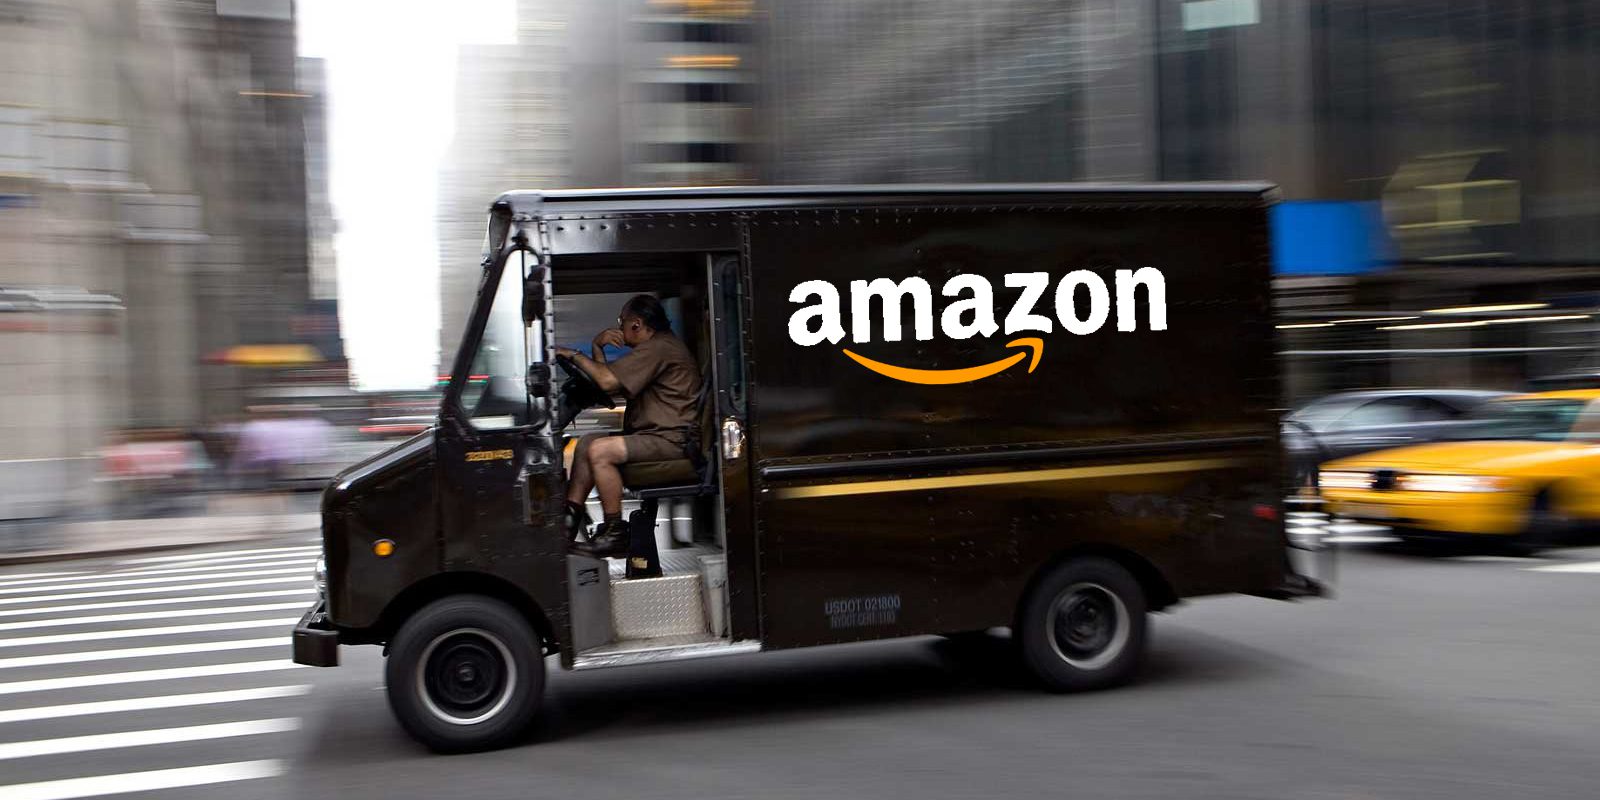 Chicago Amazon Prime members now have access to car delivery service